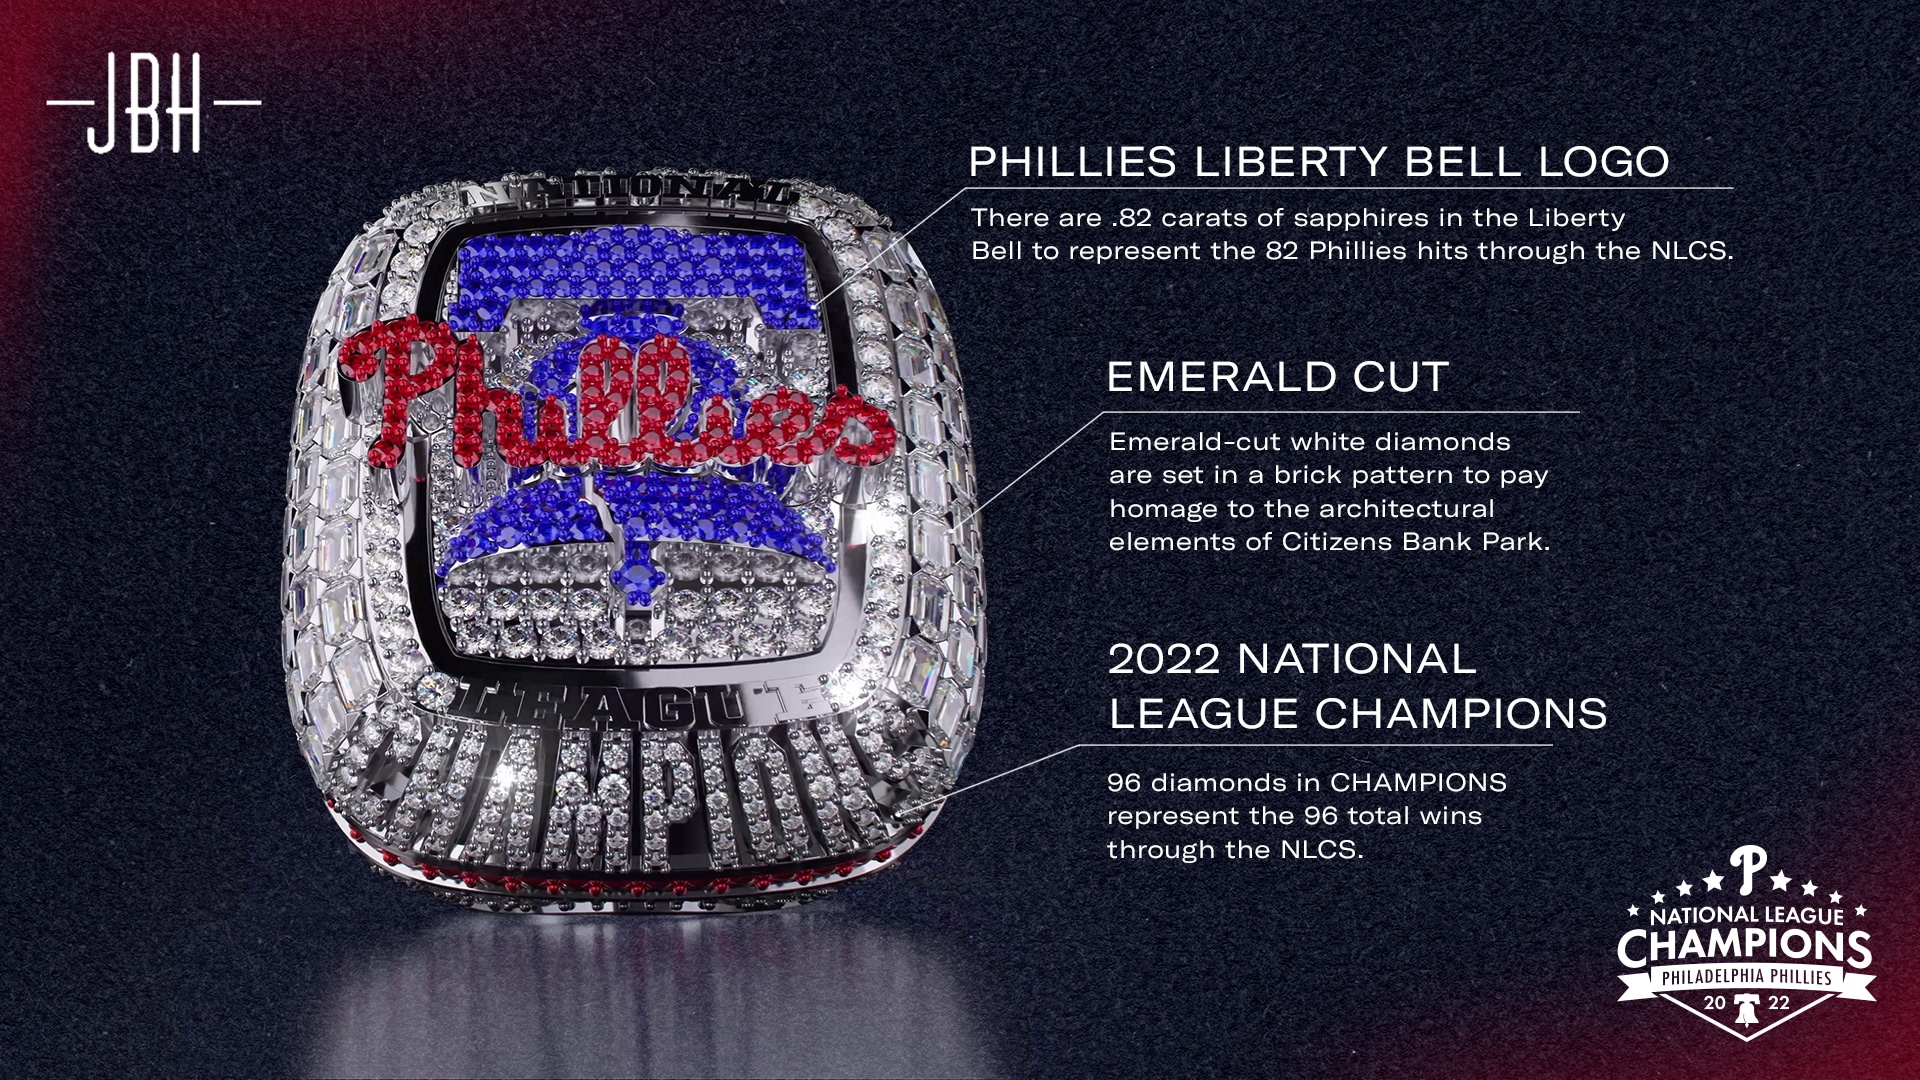 Phillies Fans Overwhelmingly Hate the “Participation Trophy” NL Champion Rings